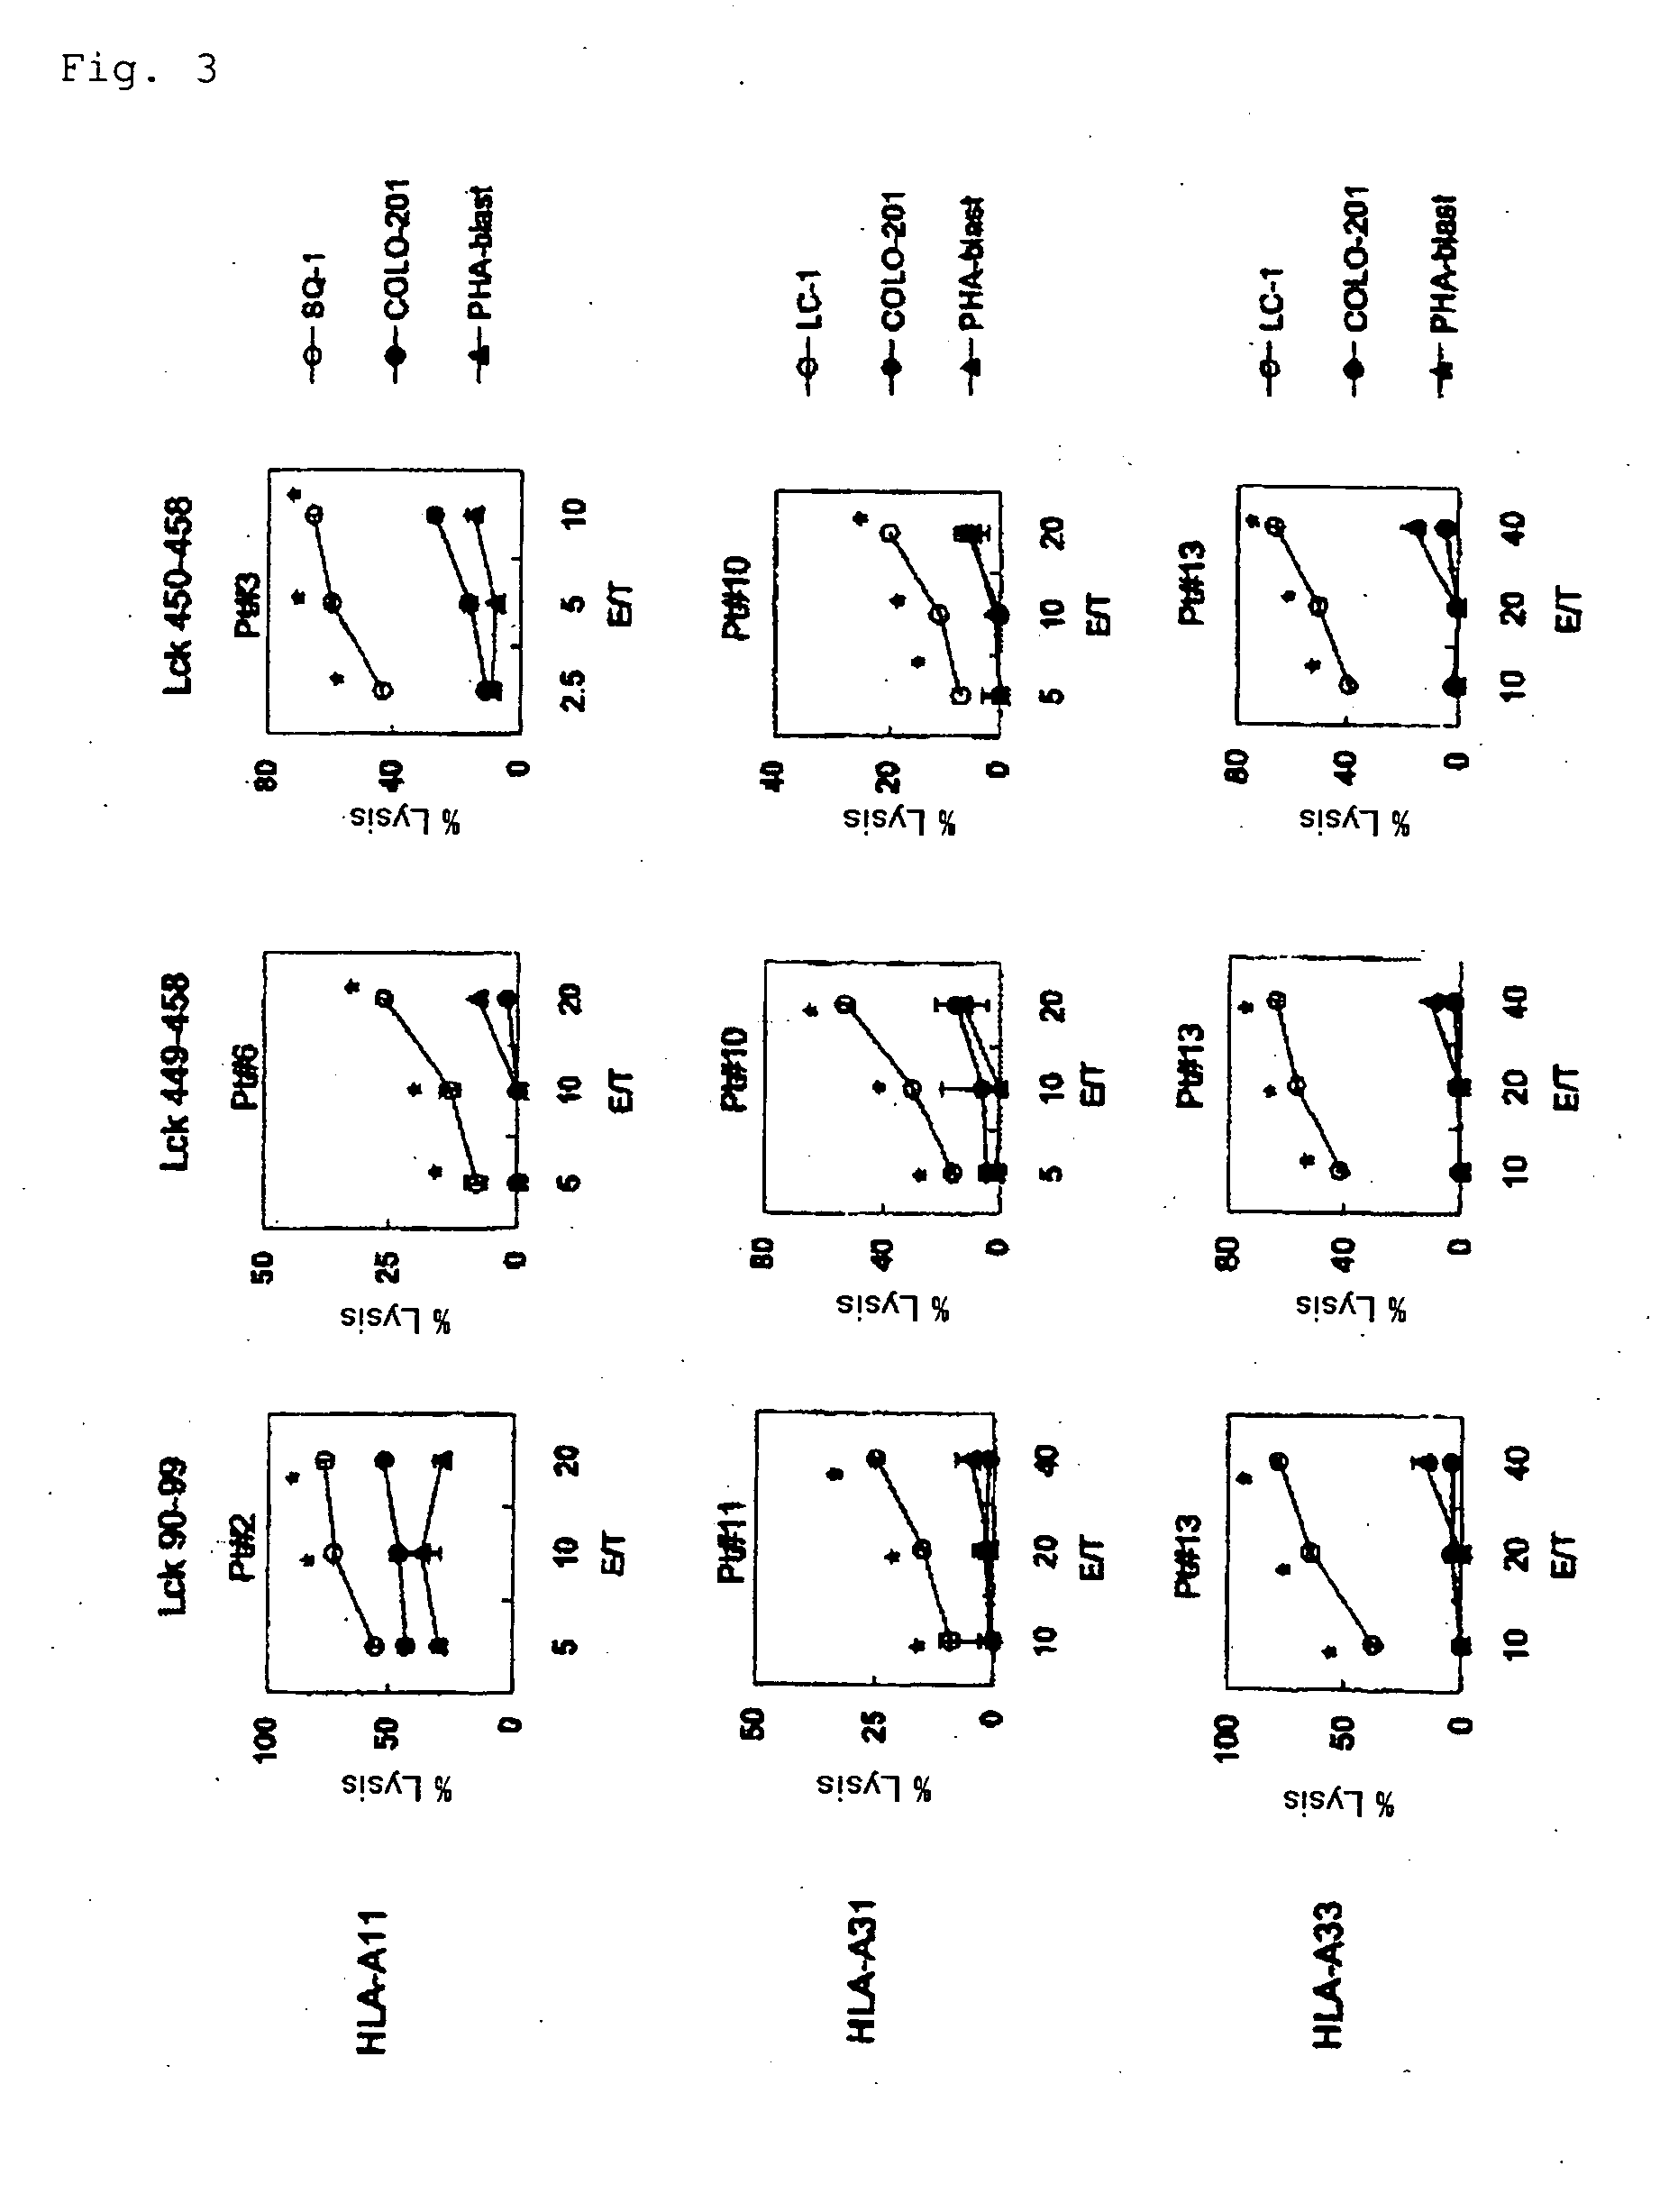 Ctl inducer composition